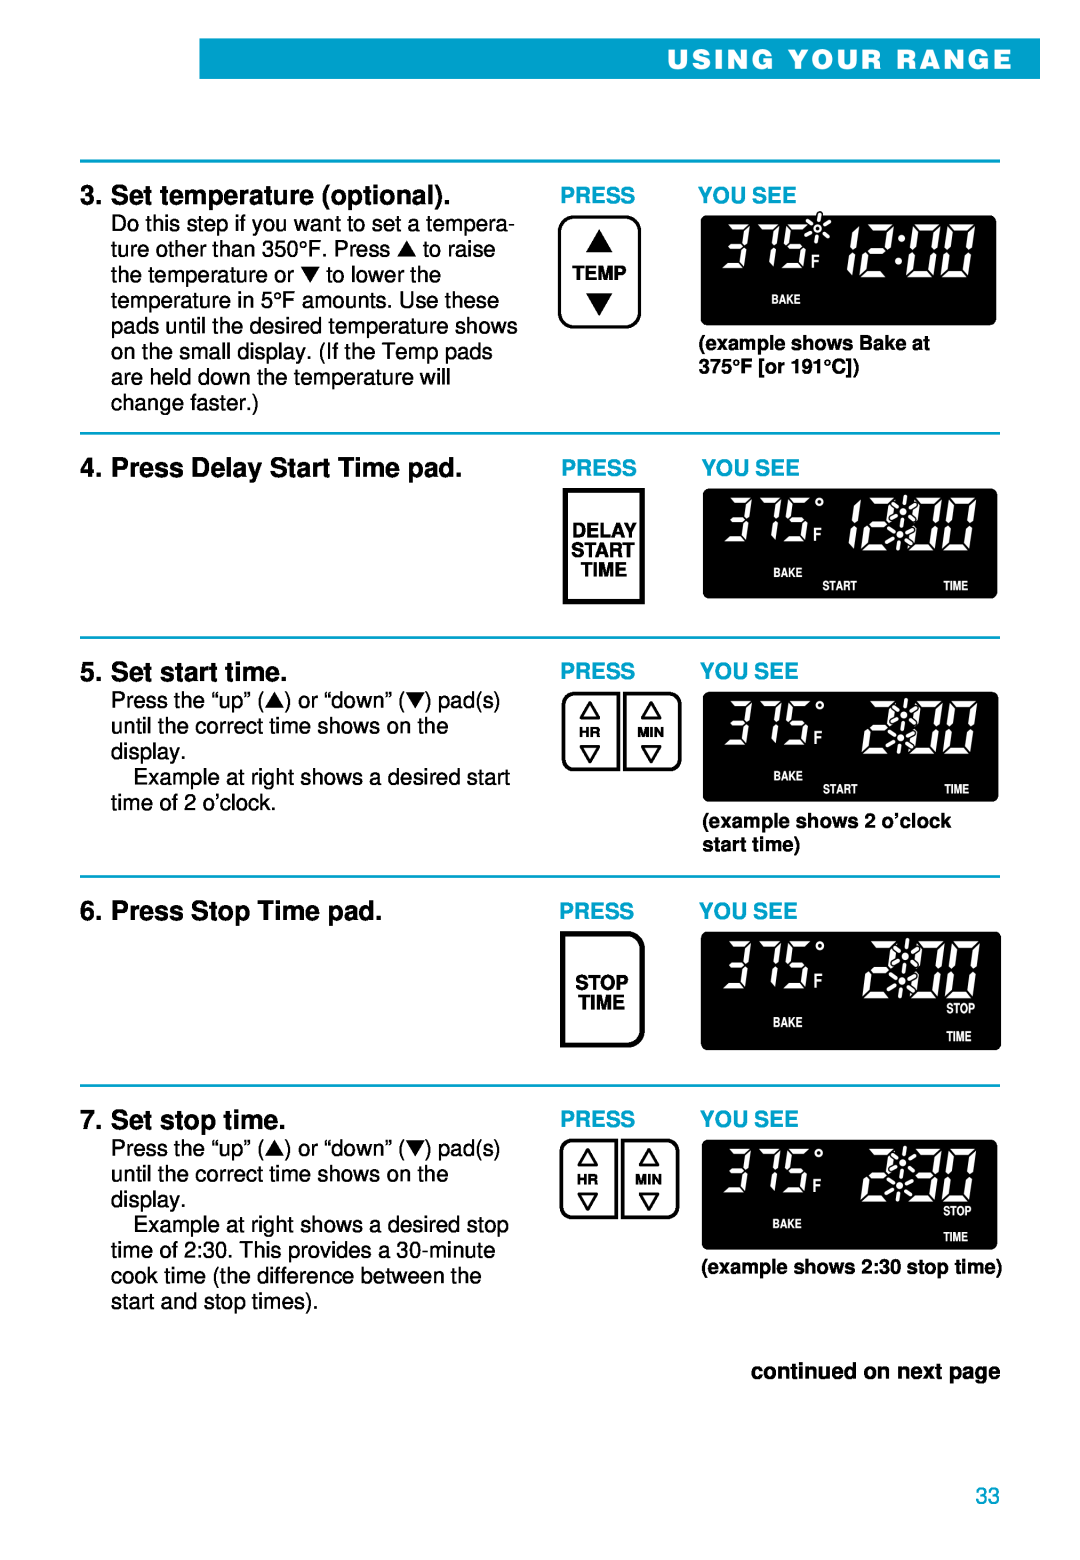 Whirlpool RS675PXE Press Delay Start Time pad, Set start time, Press Stop Time pad, Set stop time, Using Your Range 